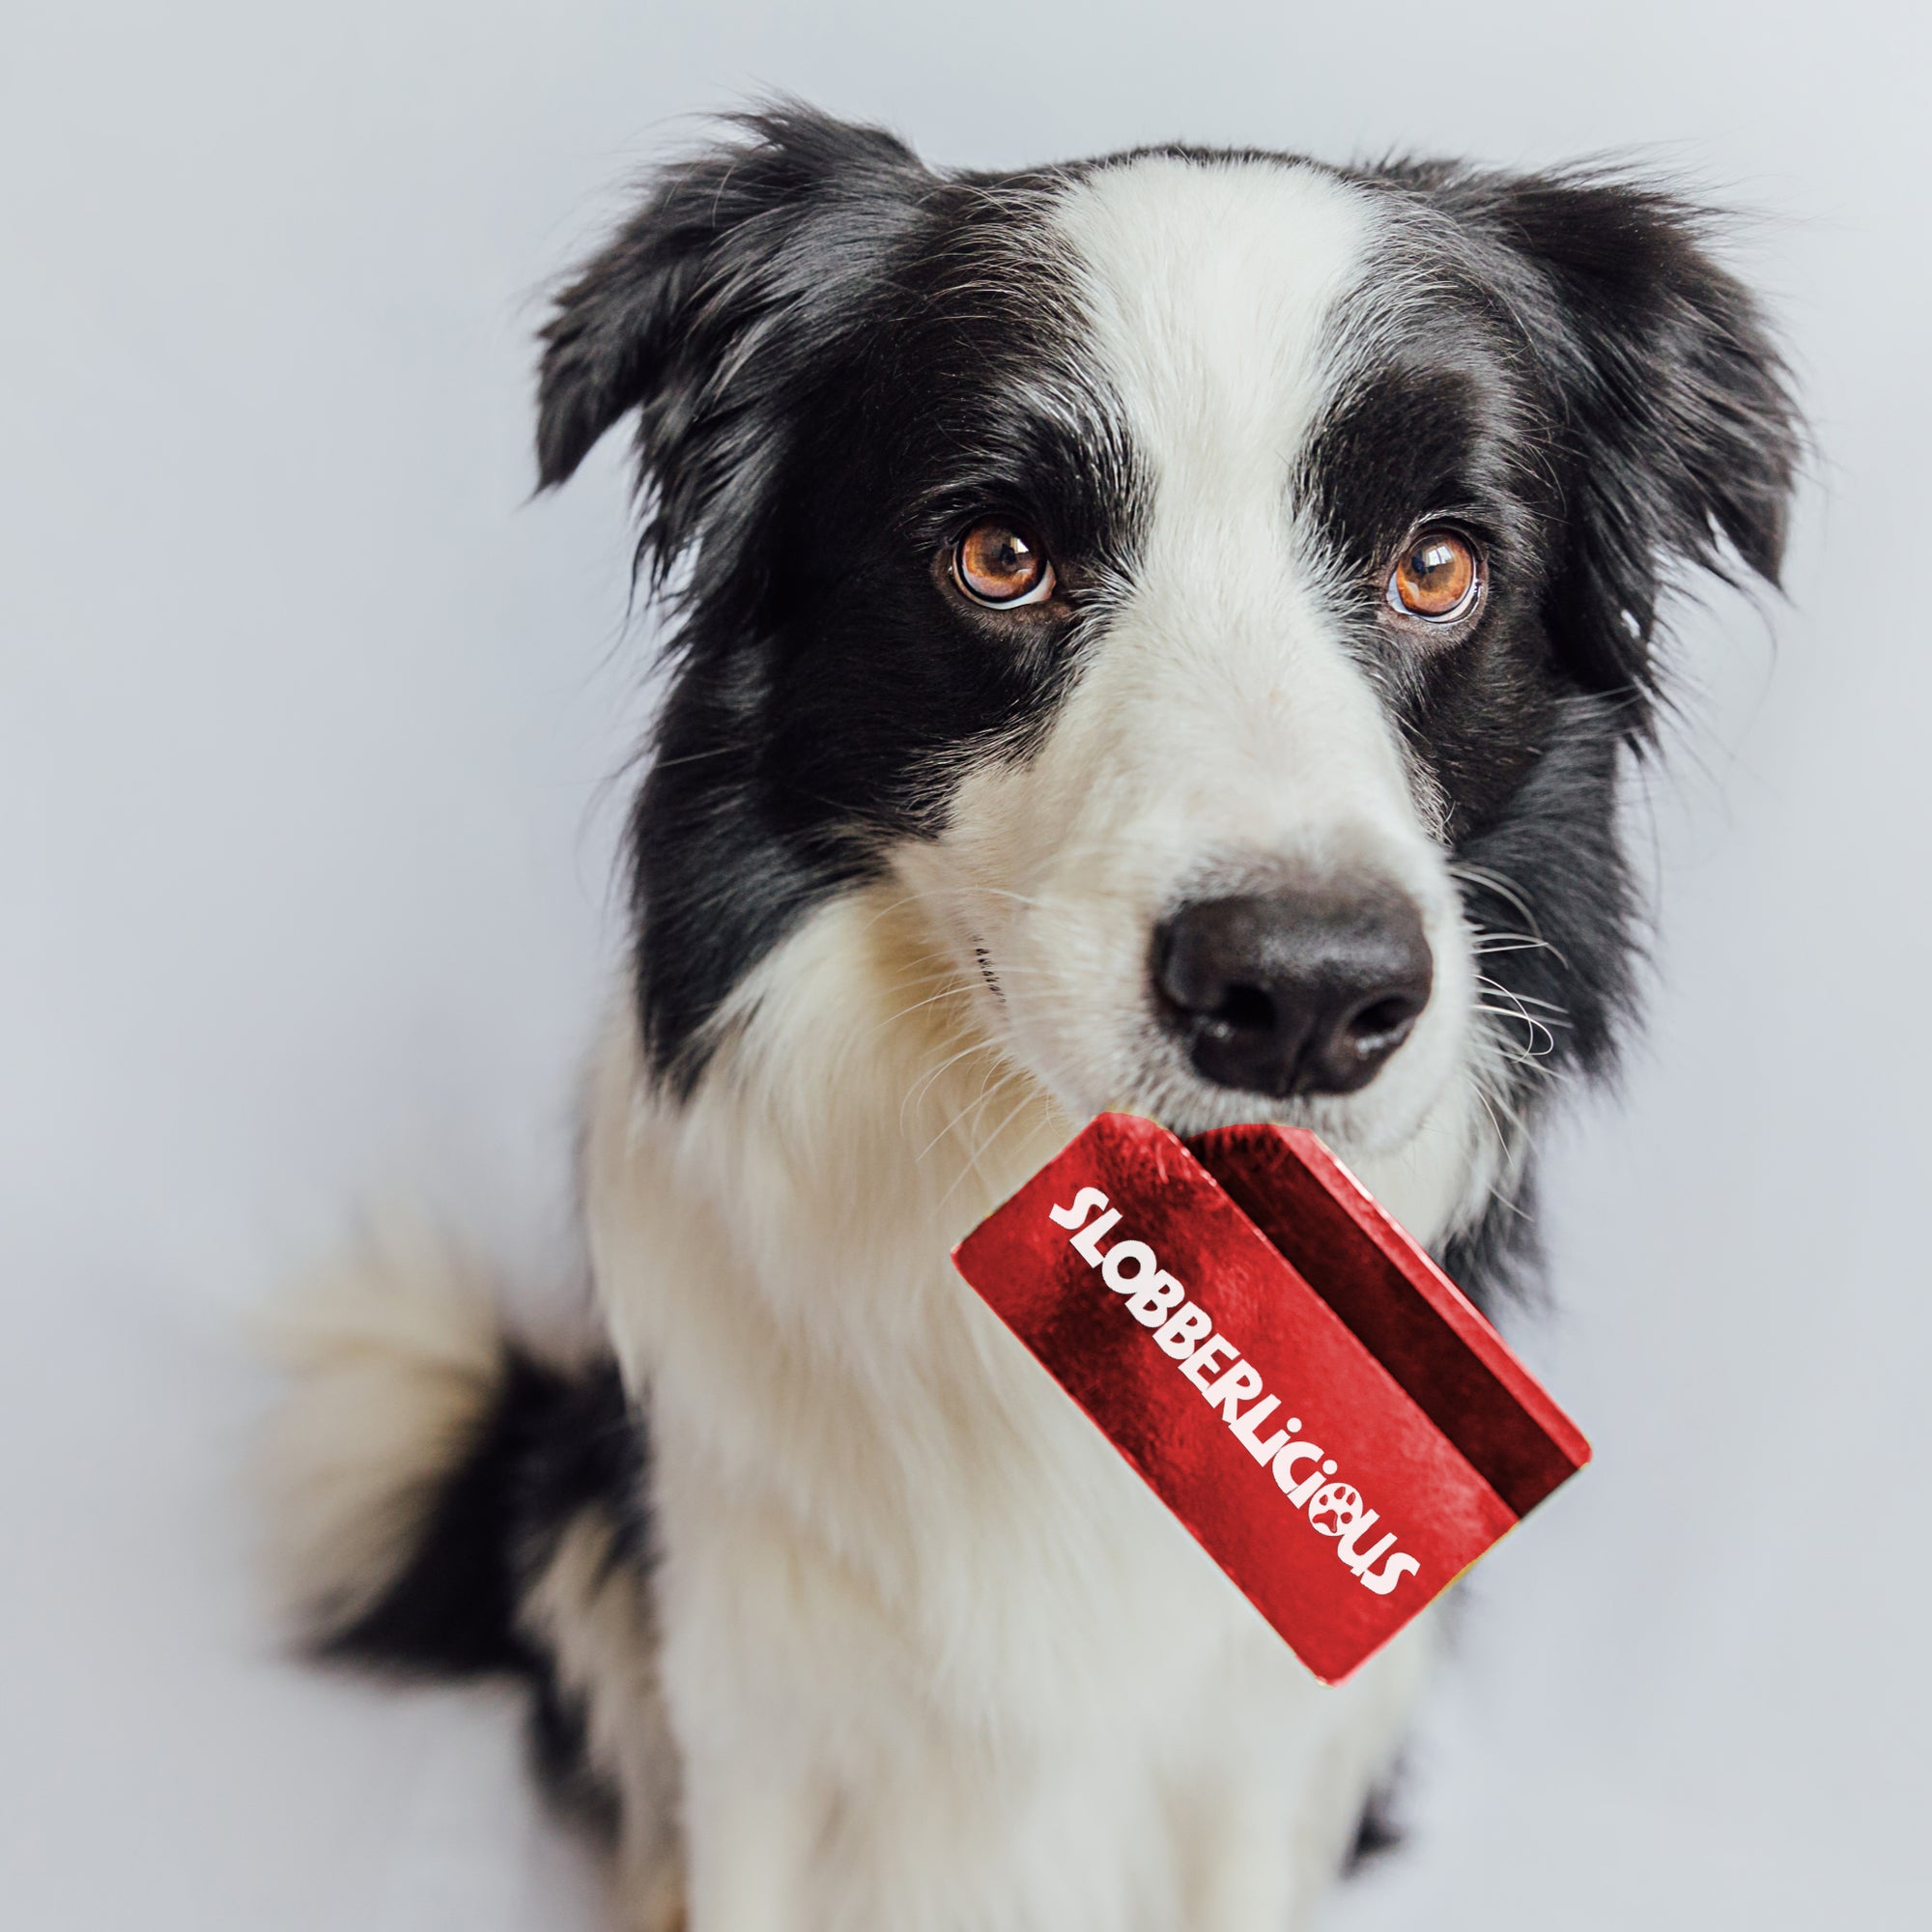 A dog holding a gift card